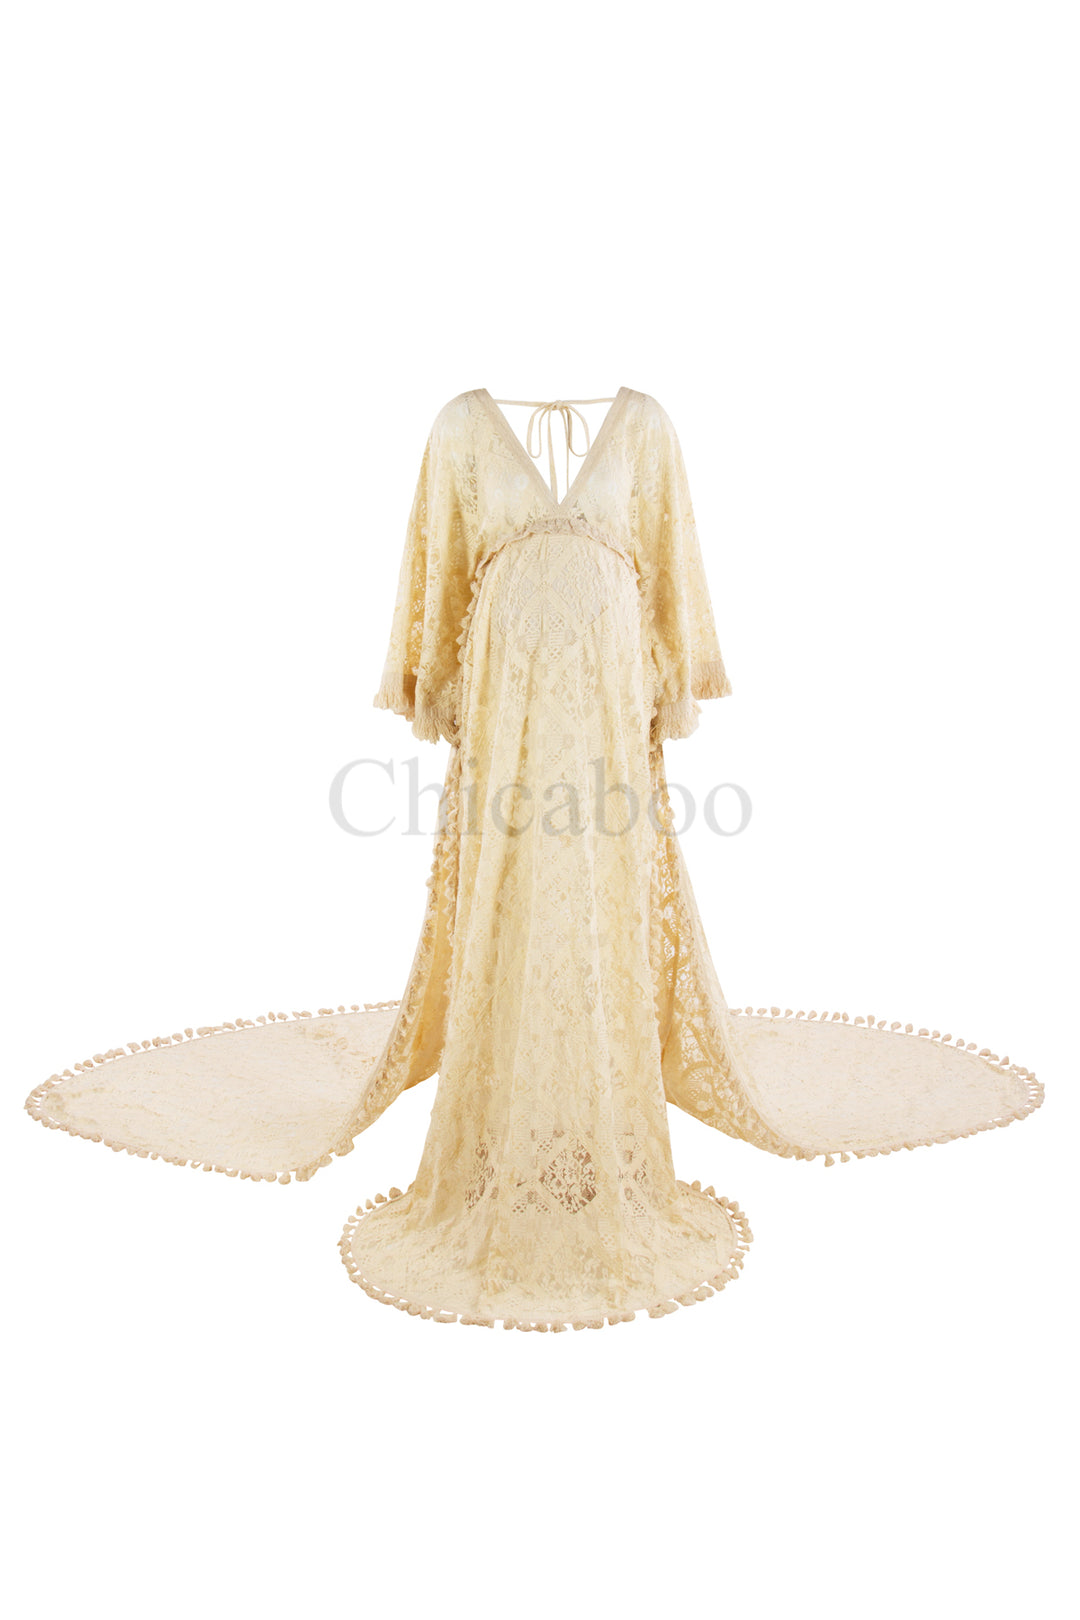 Ivy Lace Gown in Vintage Beige -Unlined Lace  (Size 4-14)